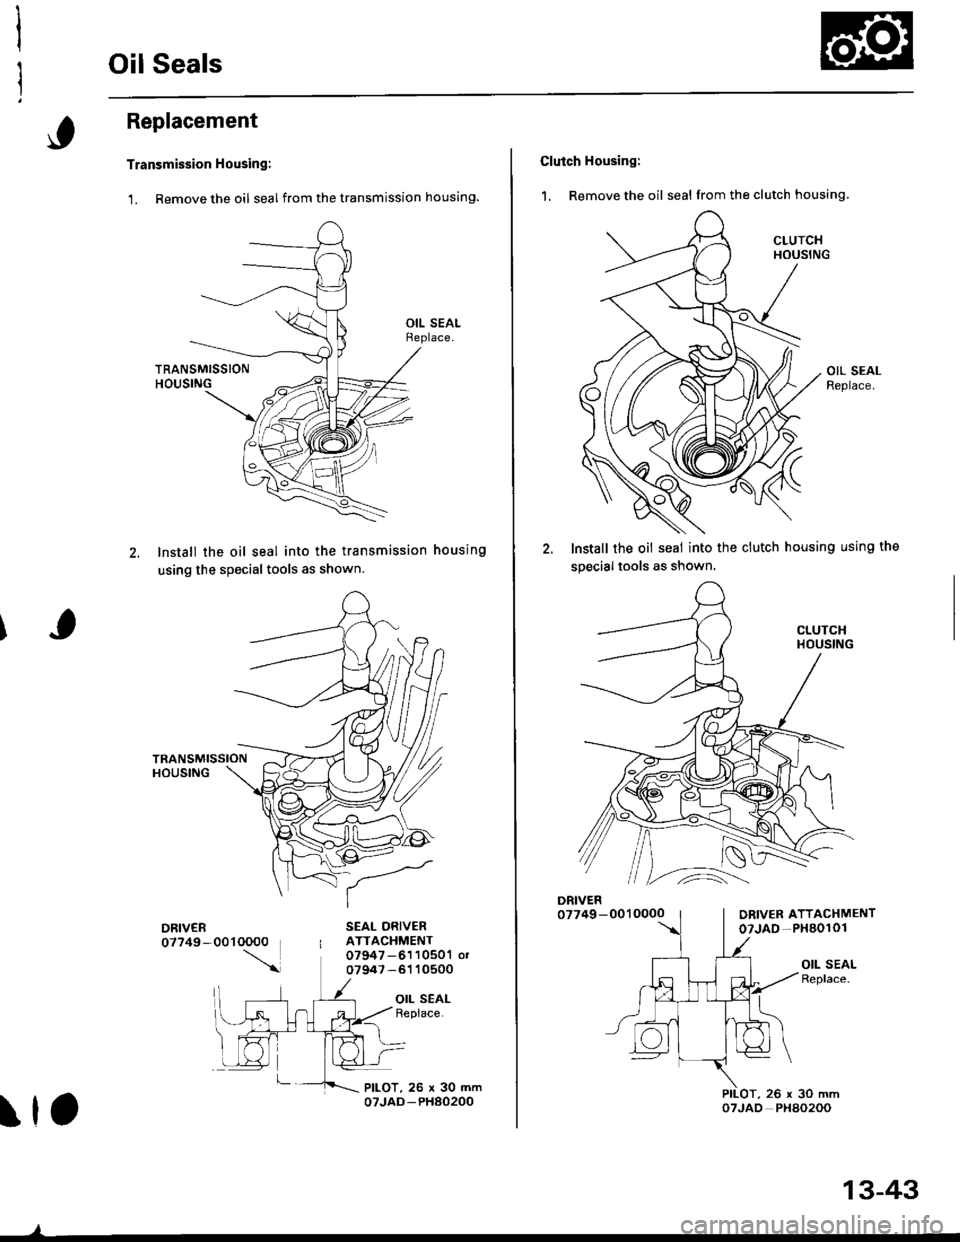 HONDA CIVIC 1996 6.G Workshop Manual Oil Seals
Replacement
Transmission Housing:
1. Remove the oil seal from the transmission housing.
lnstall the oil seal into the transmission housing
using the special tools as shown.
SEAL ORIVERATTACH